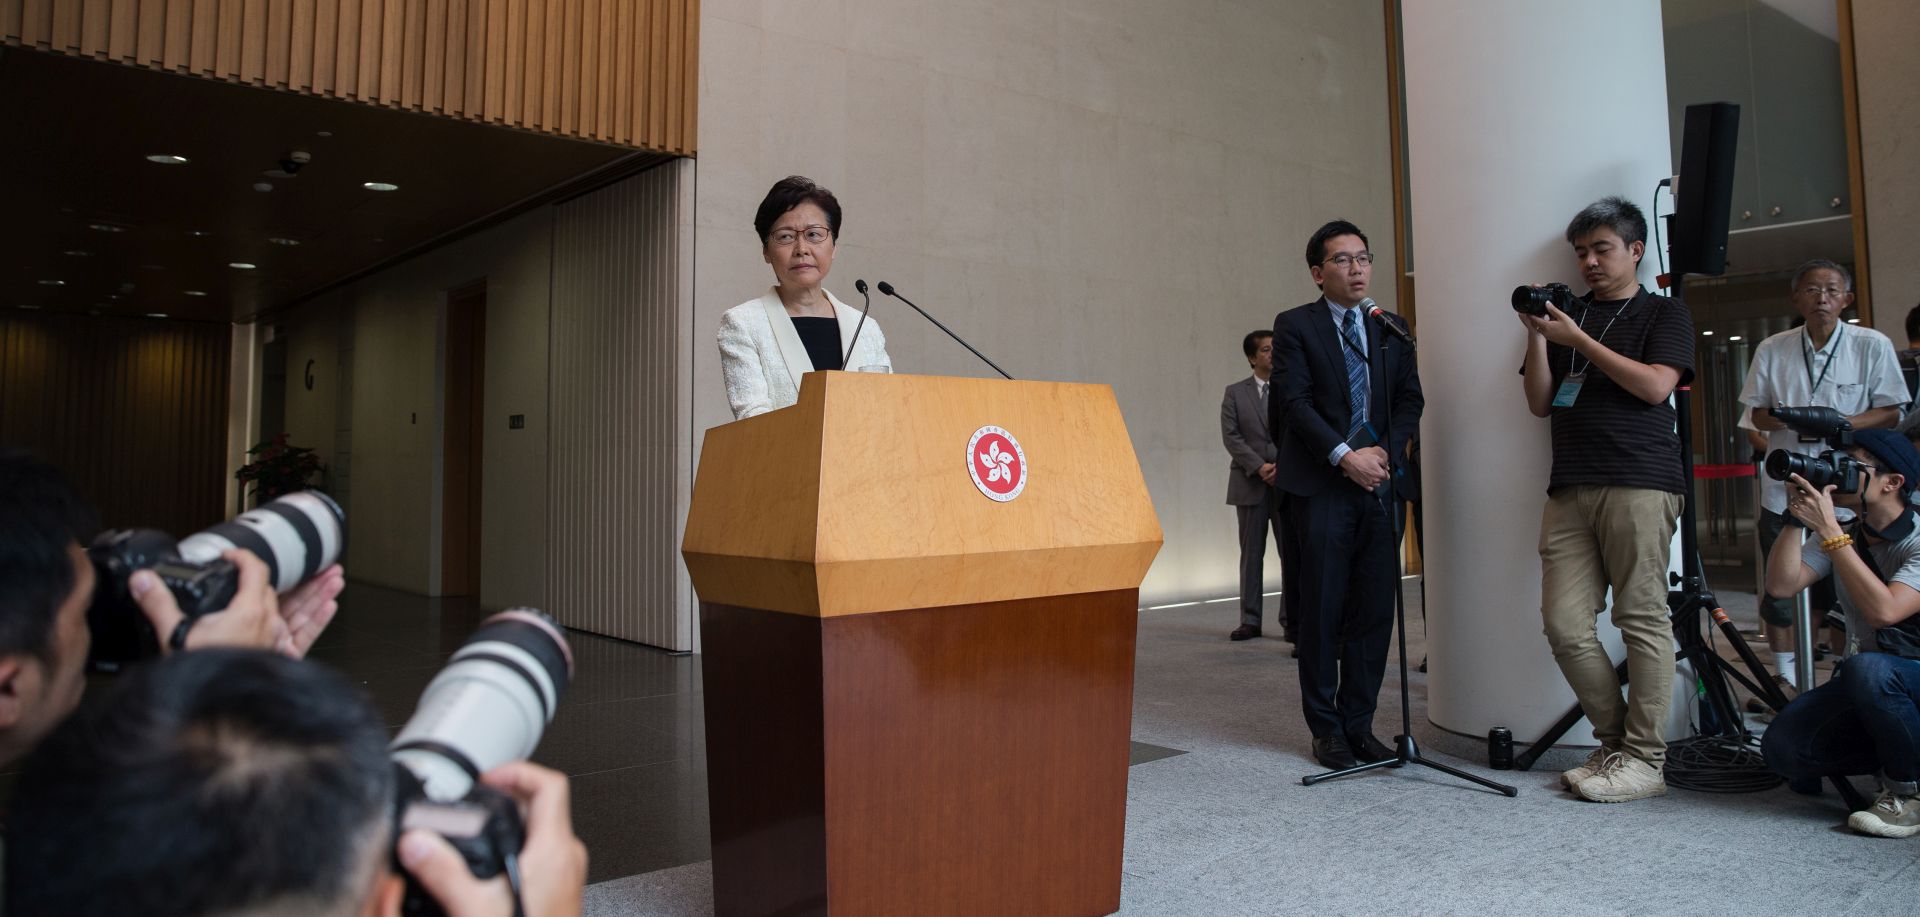 epa07813937 Hong Kong Chief Executive Carrie Lam (C) attends a press conference at the government offices in Hong Kong, China, 03 September 2019. According to reports Lam has told a group of business leaders that she's sorry for the 'unforgivable havoc' caused by her attempts to pass the extradition bill, while admitting she had limited scope to resolve the crisis as Sino-US tensions increase. Hong Kong has been gripped by mass protests since June over a now-suspended extradition bill that have morphed into a wider anti-government movement.  EPA/JEROME FAVRE